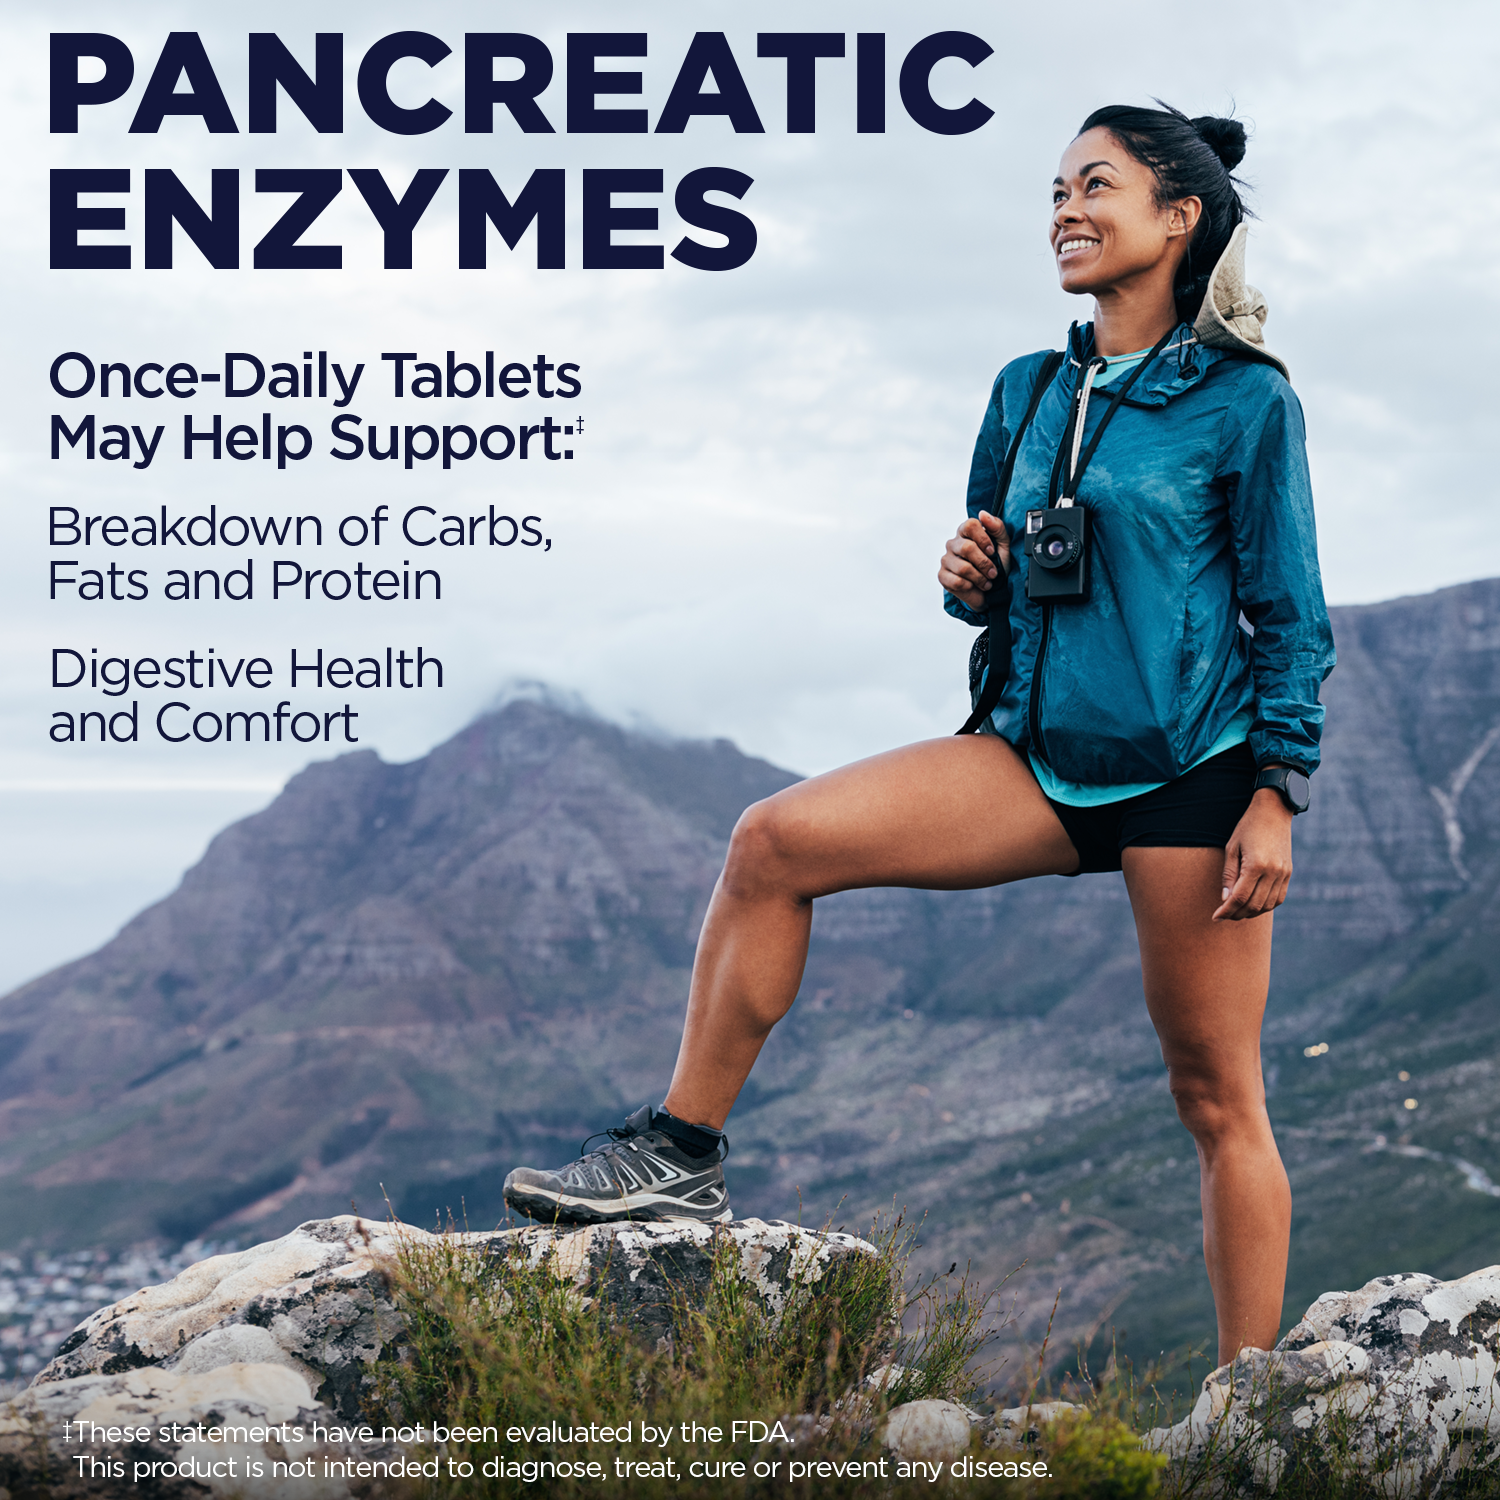 KAL Pancreatin 1400 | Pancreatic Enzymes Amylase, Protease & Lipase to Help Support Healthy Digestion of Carbs, Fats & Proteins | 250 Tablets - image 4 of 7